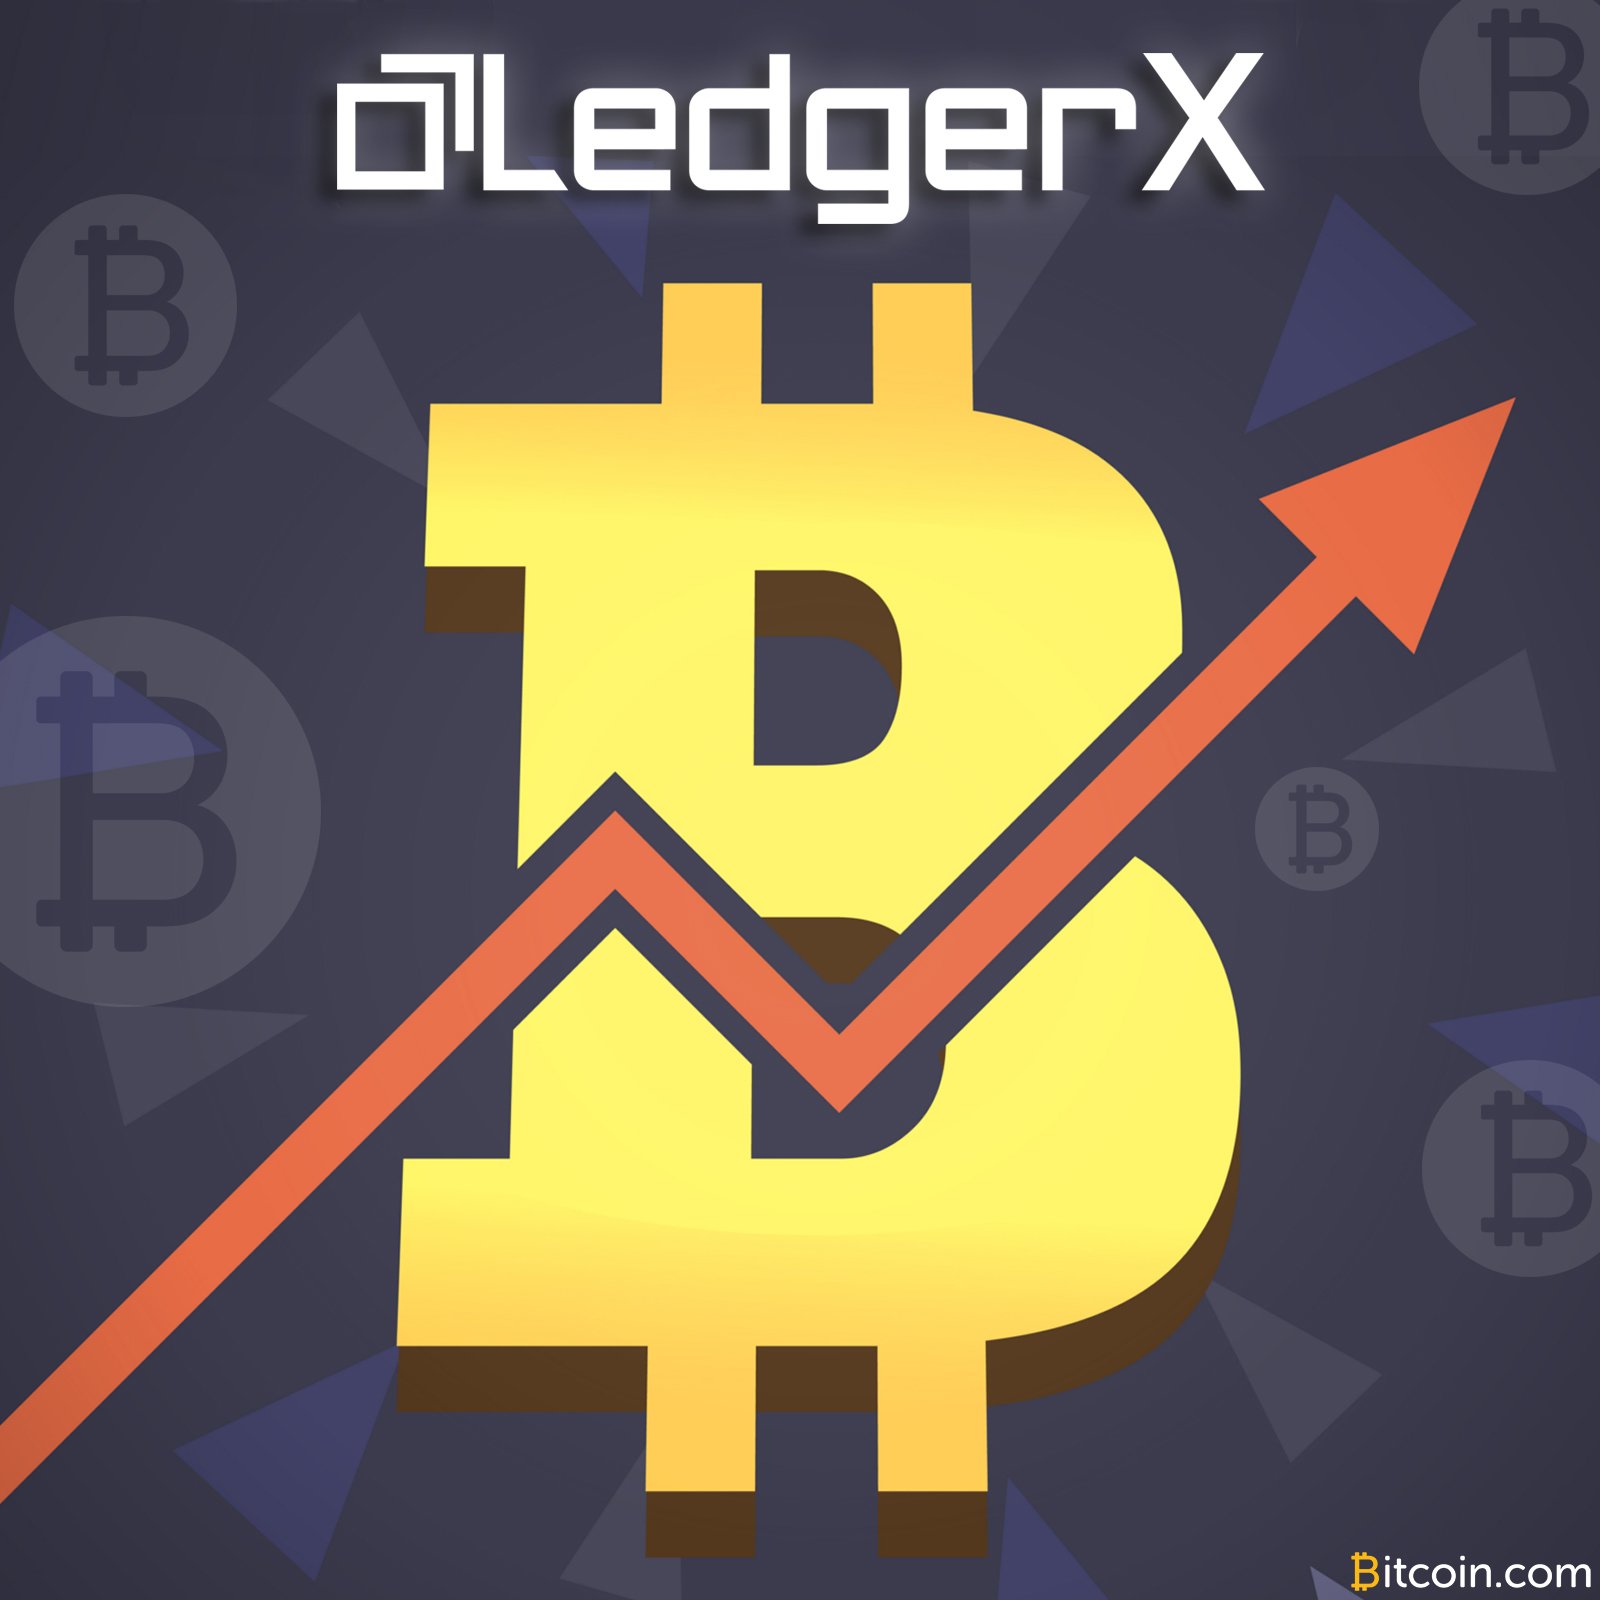 Over $1 Million in Bitcoin Swaps and Options Traded on Ledgerx in its First Week